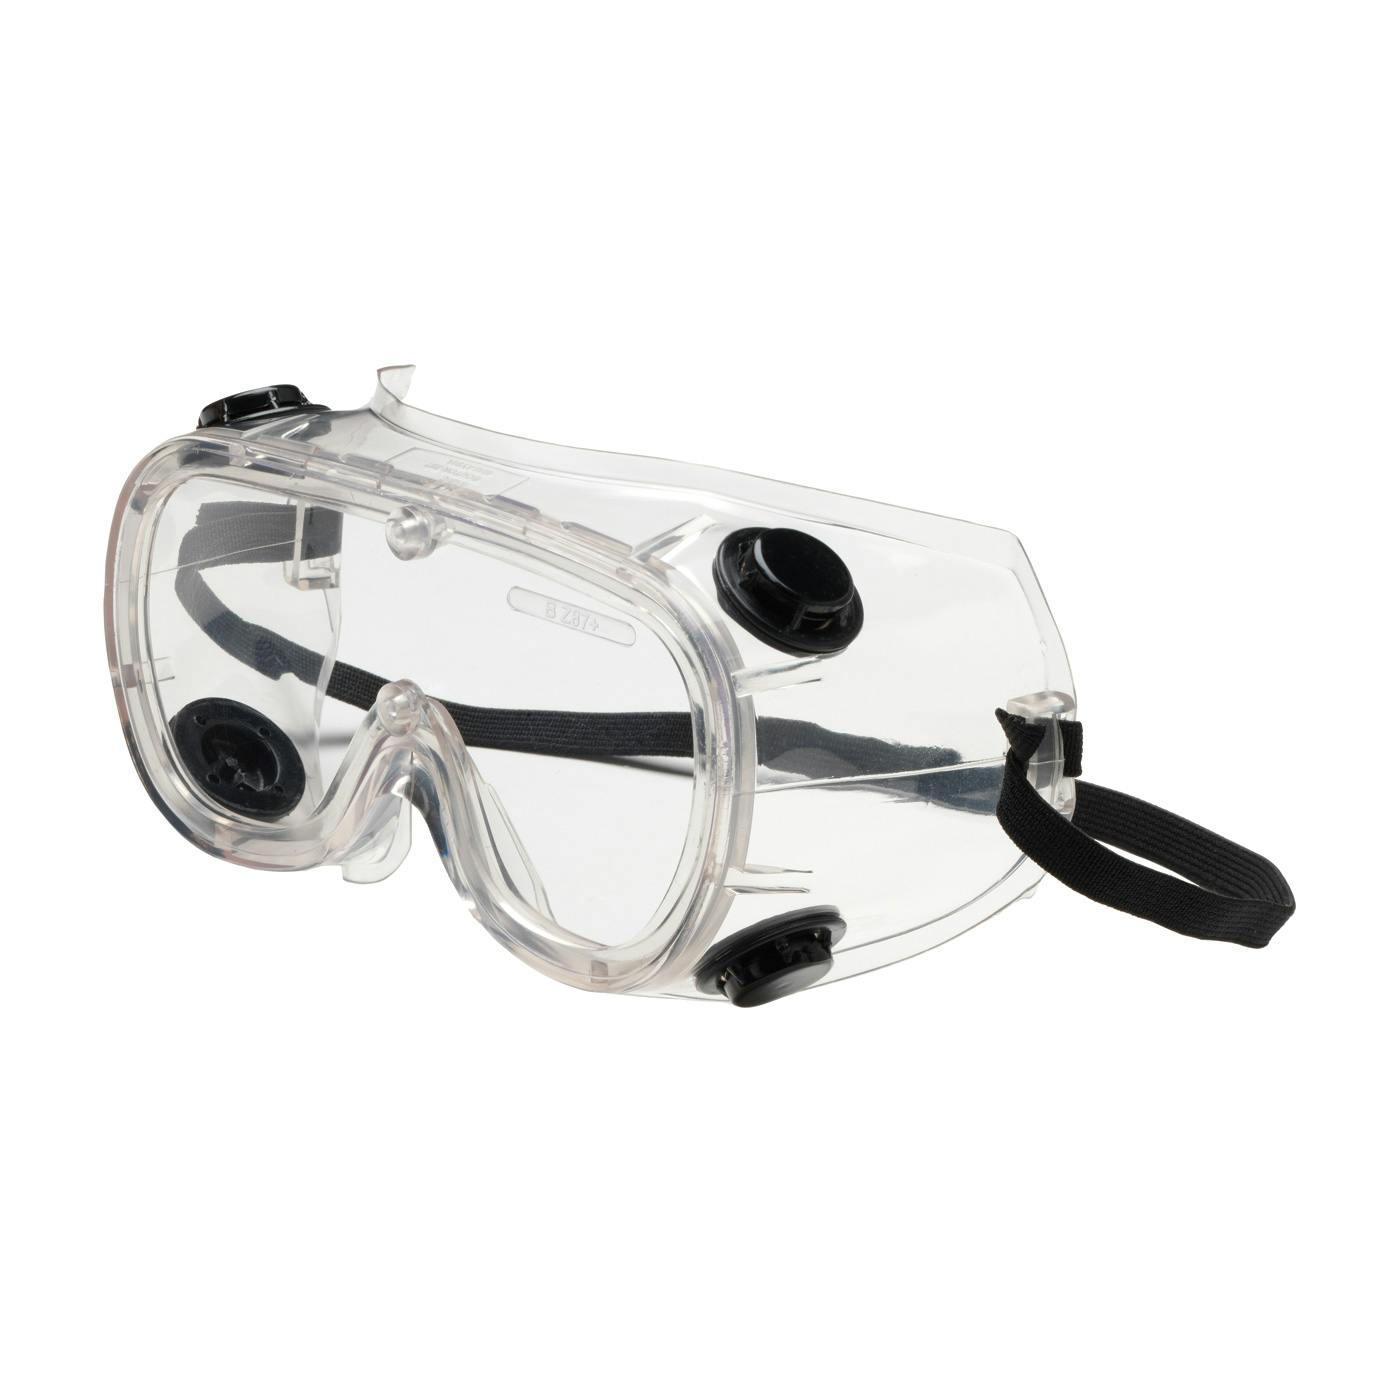 Indirect Vent Goggle with Clear Body, Clear Lens and Anti-Scratch / Anti-Fog Coating, Clear (248-4401-400) - OS